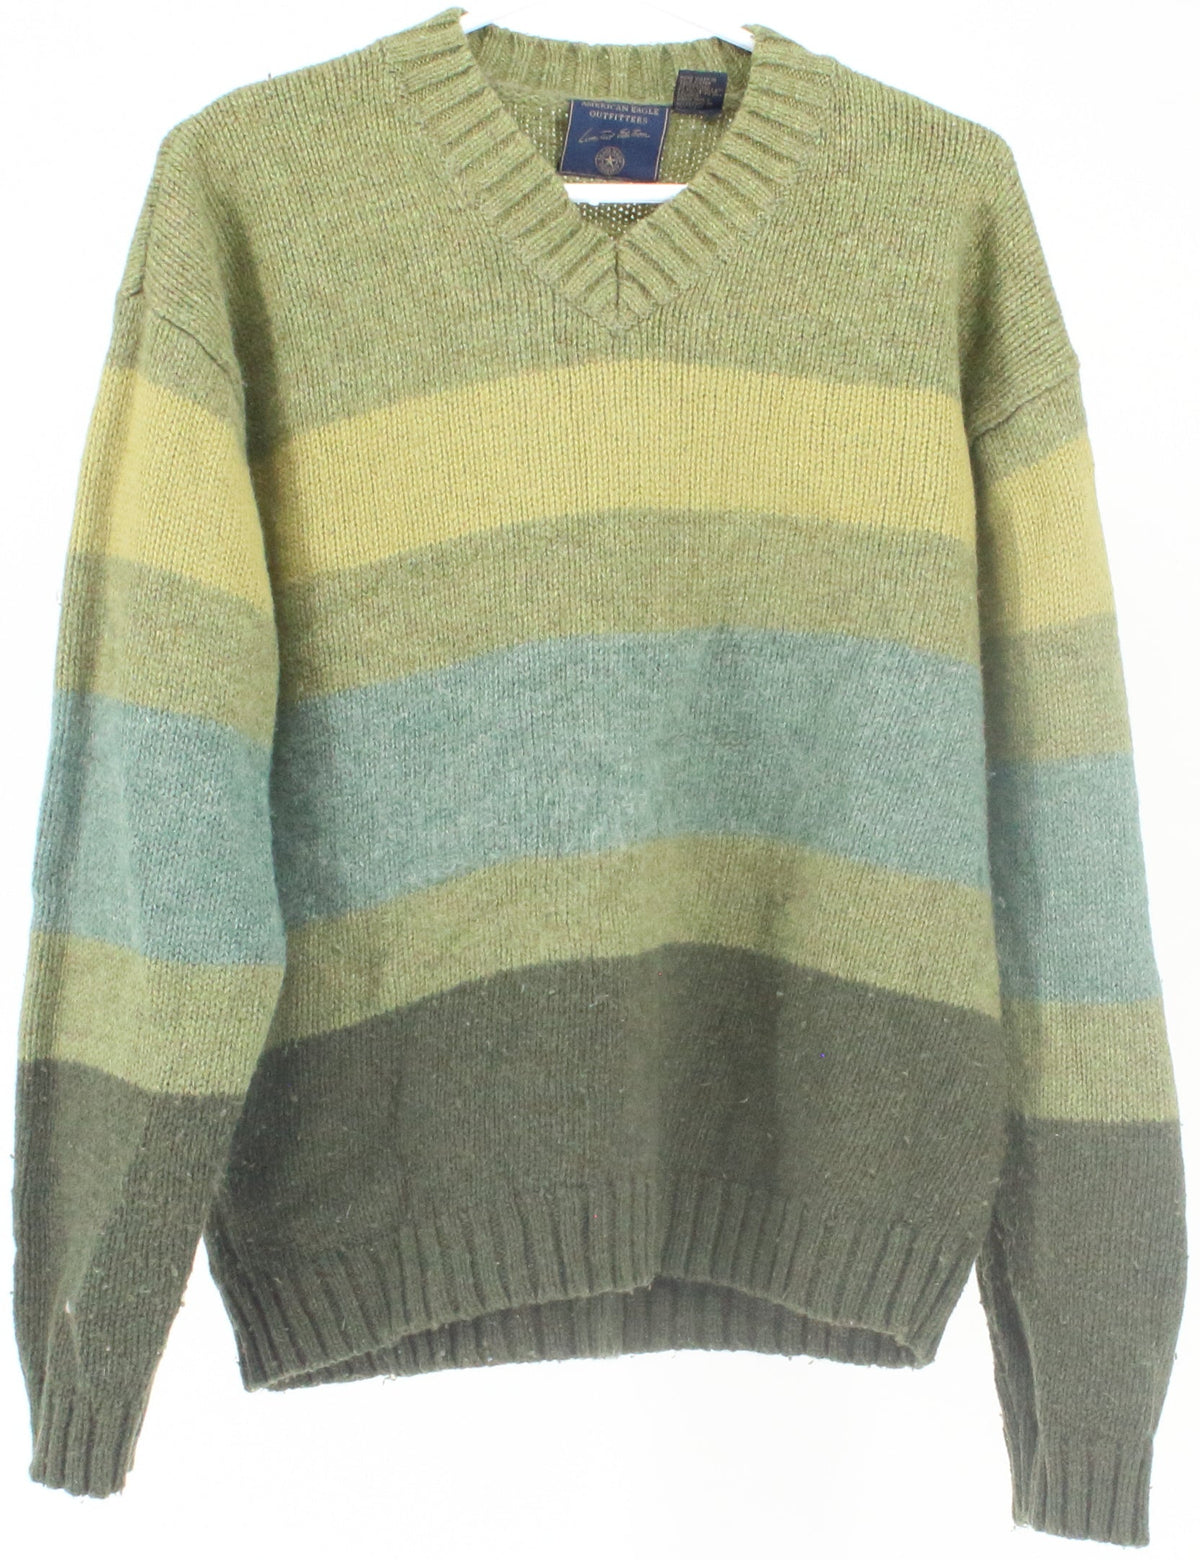 American Eagle Outfitters Limited Edition V Neck Green Striped Men's Sweater